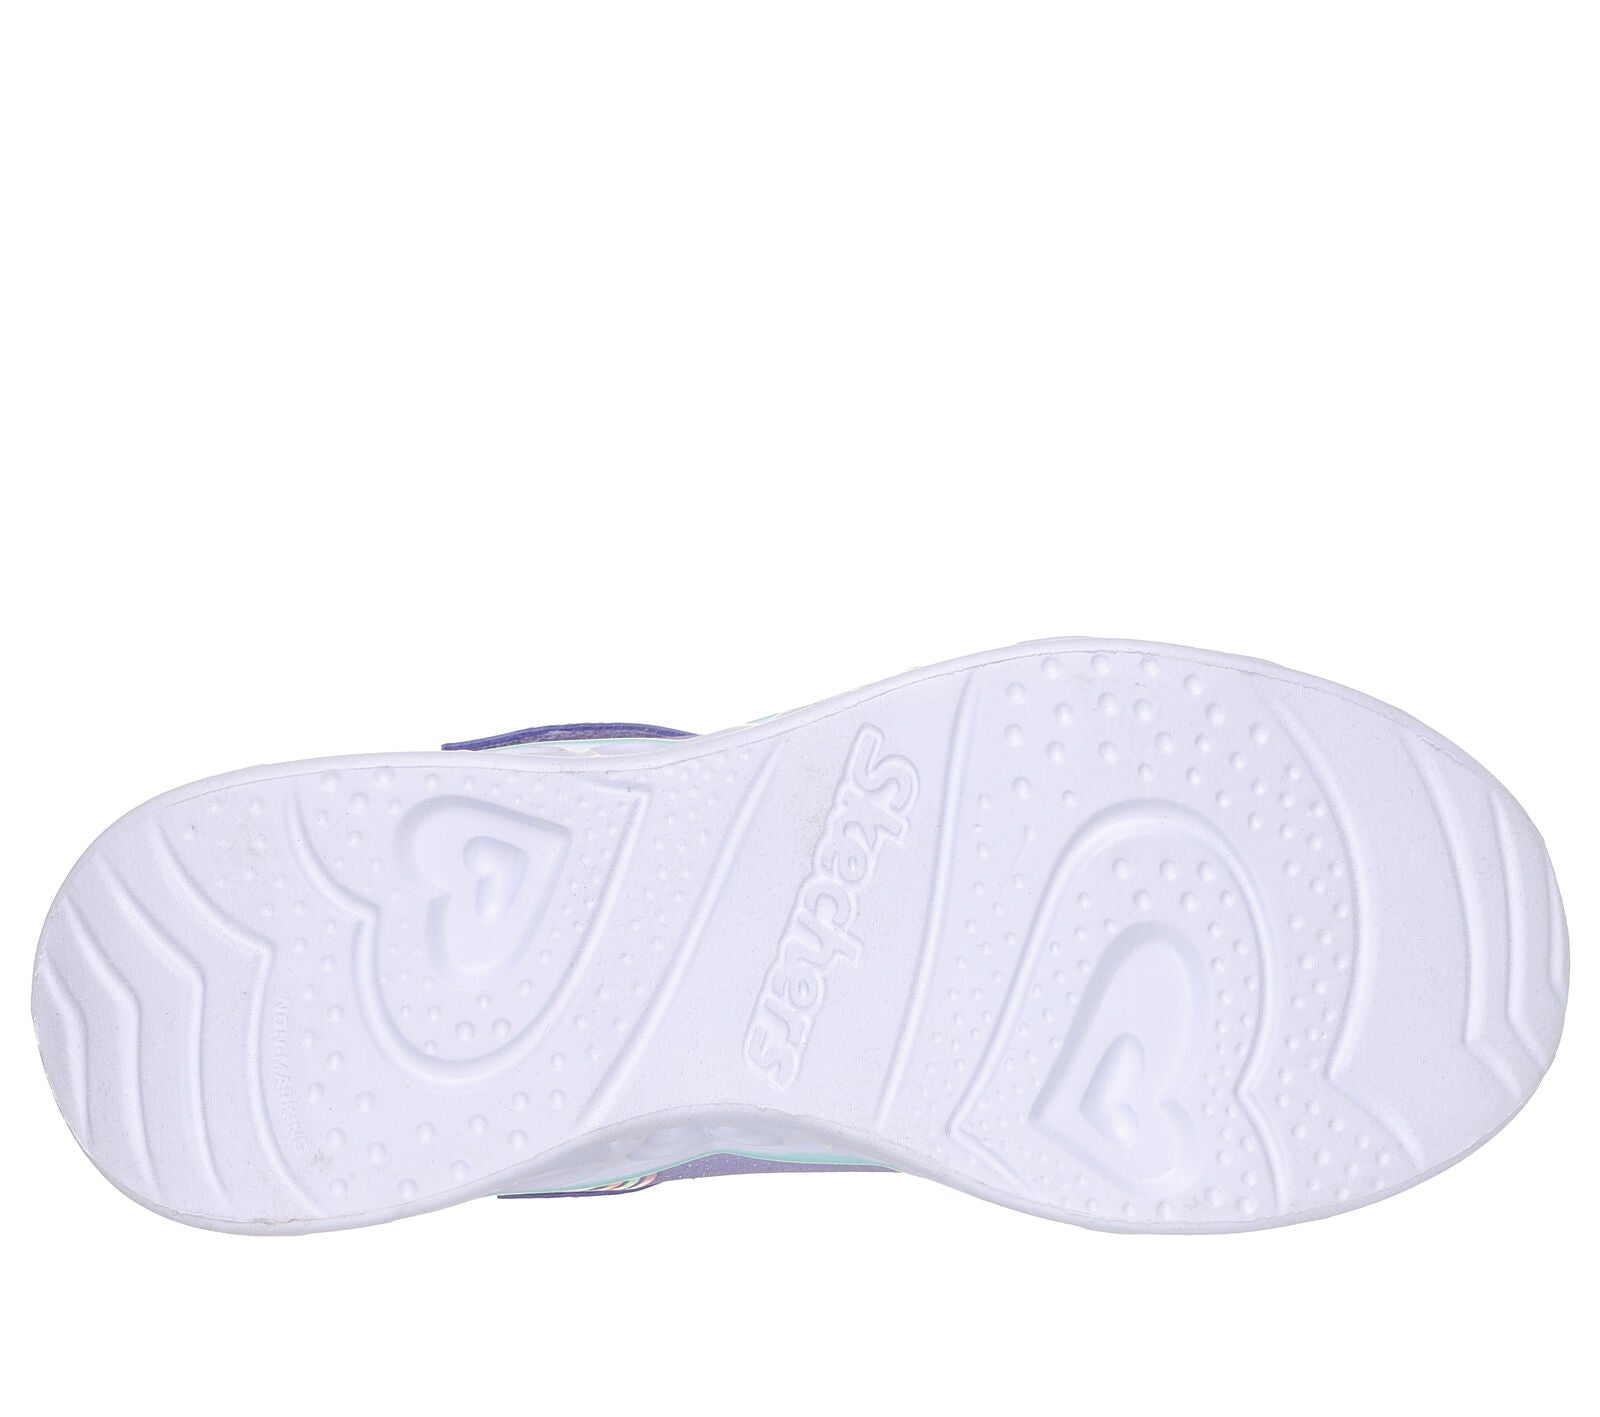 Skechers  S Lights Retro Hearts in lavender with a multi coloured swirl pattern round the upper. Lights along the  heart sole unit and the Skechers branding. Velcro fastening with flat stretch bungee laces. Sole view.